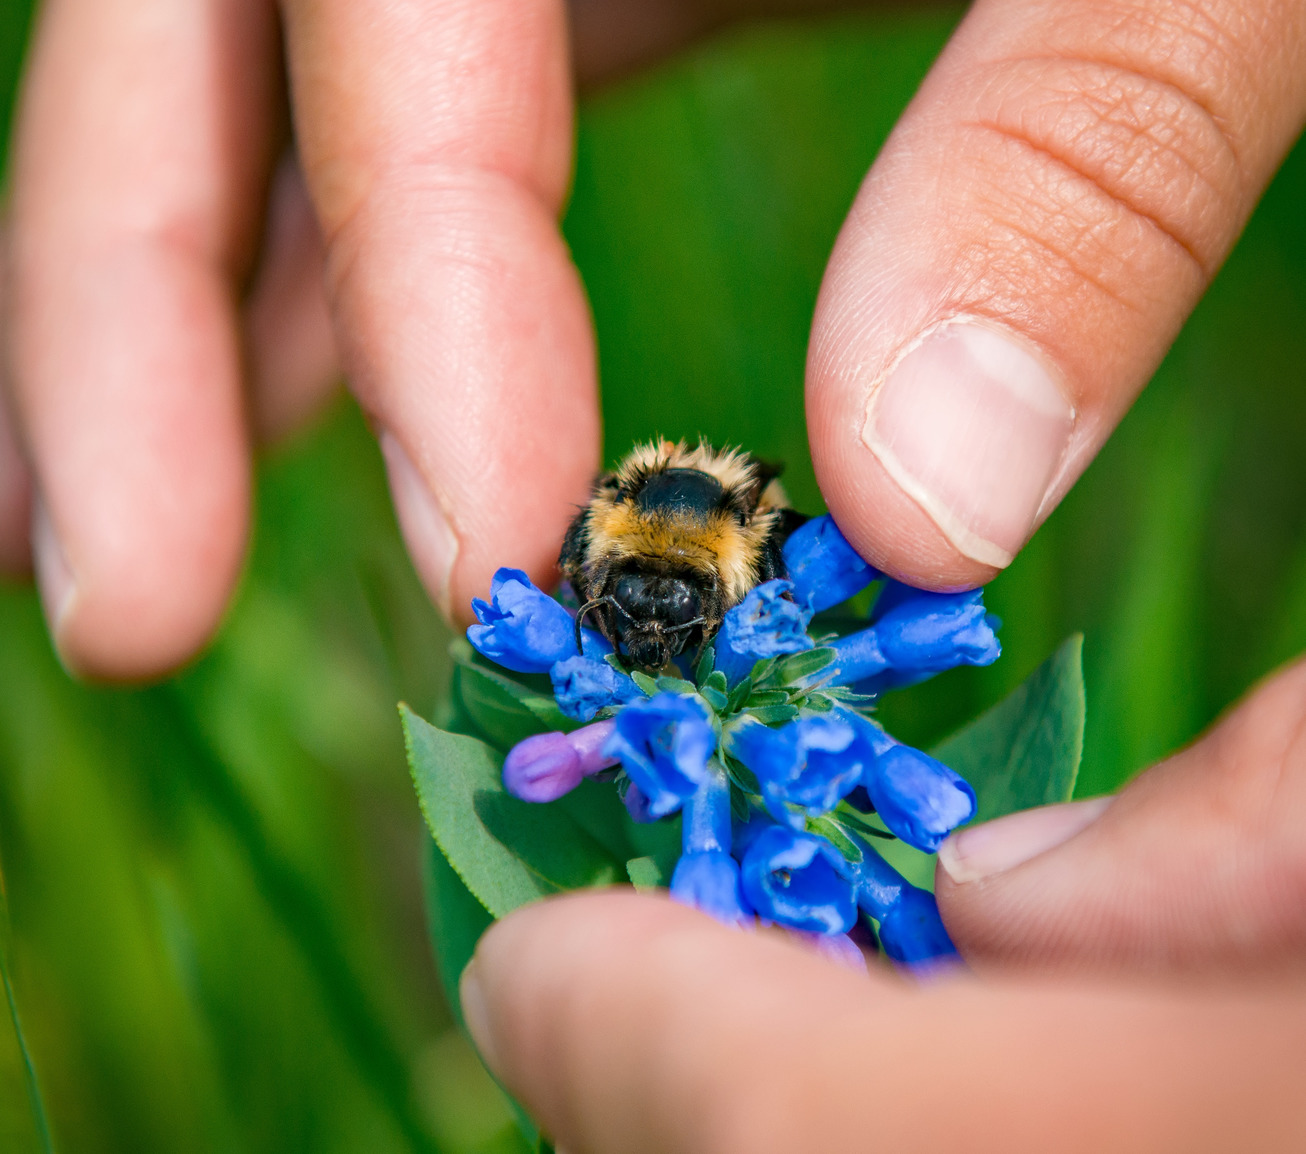 Two hands gently holding a flower with a bee on it